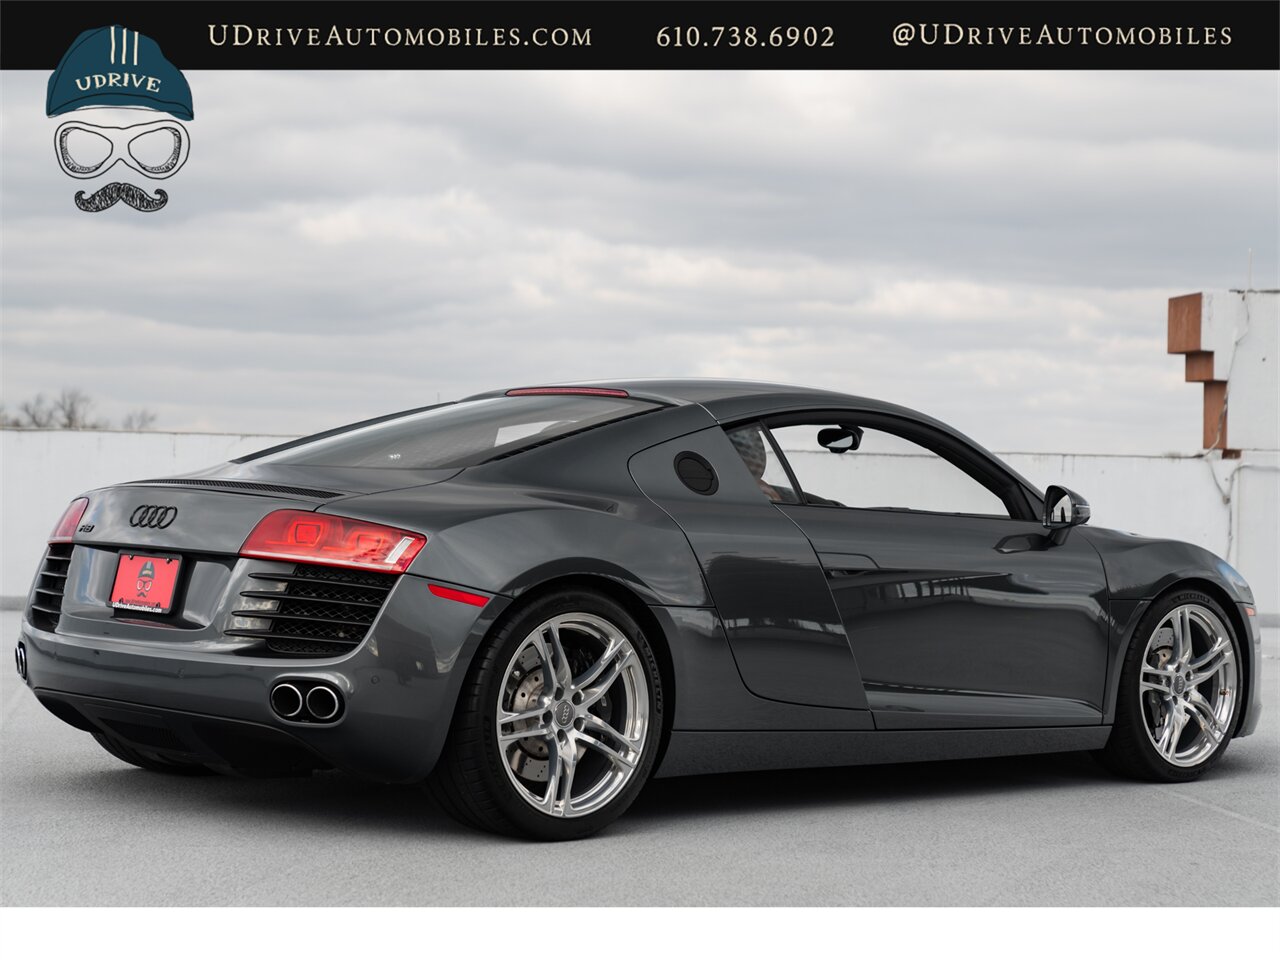 2009 Audi R8 Quattro  4.2 V8 6 Speed Manual 15k Miles - Photo 22 - West Chester, PA 19382